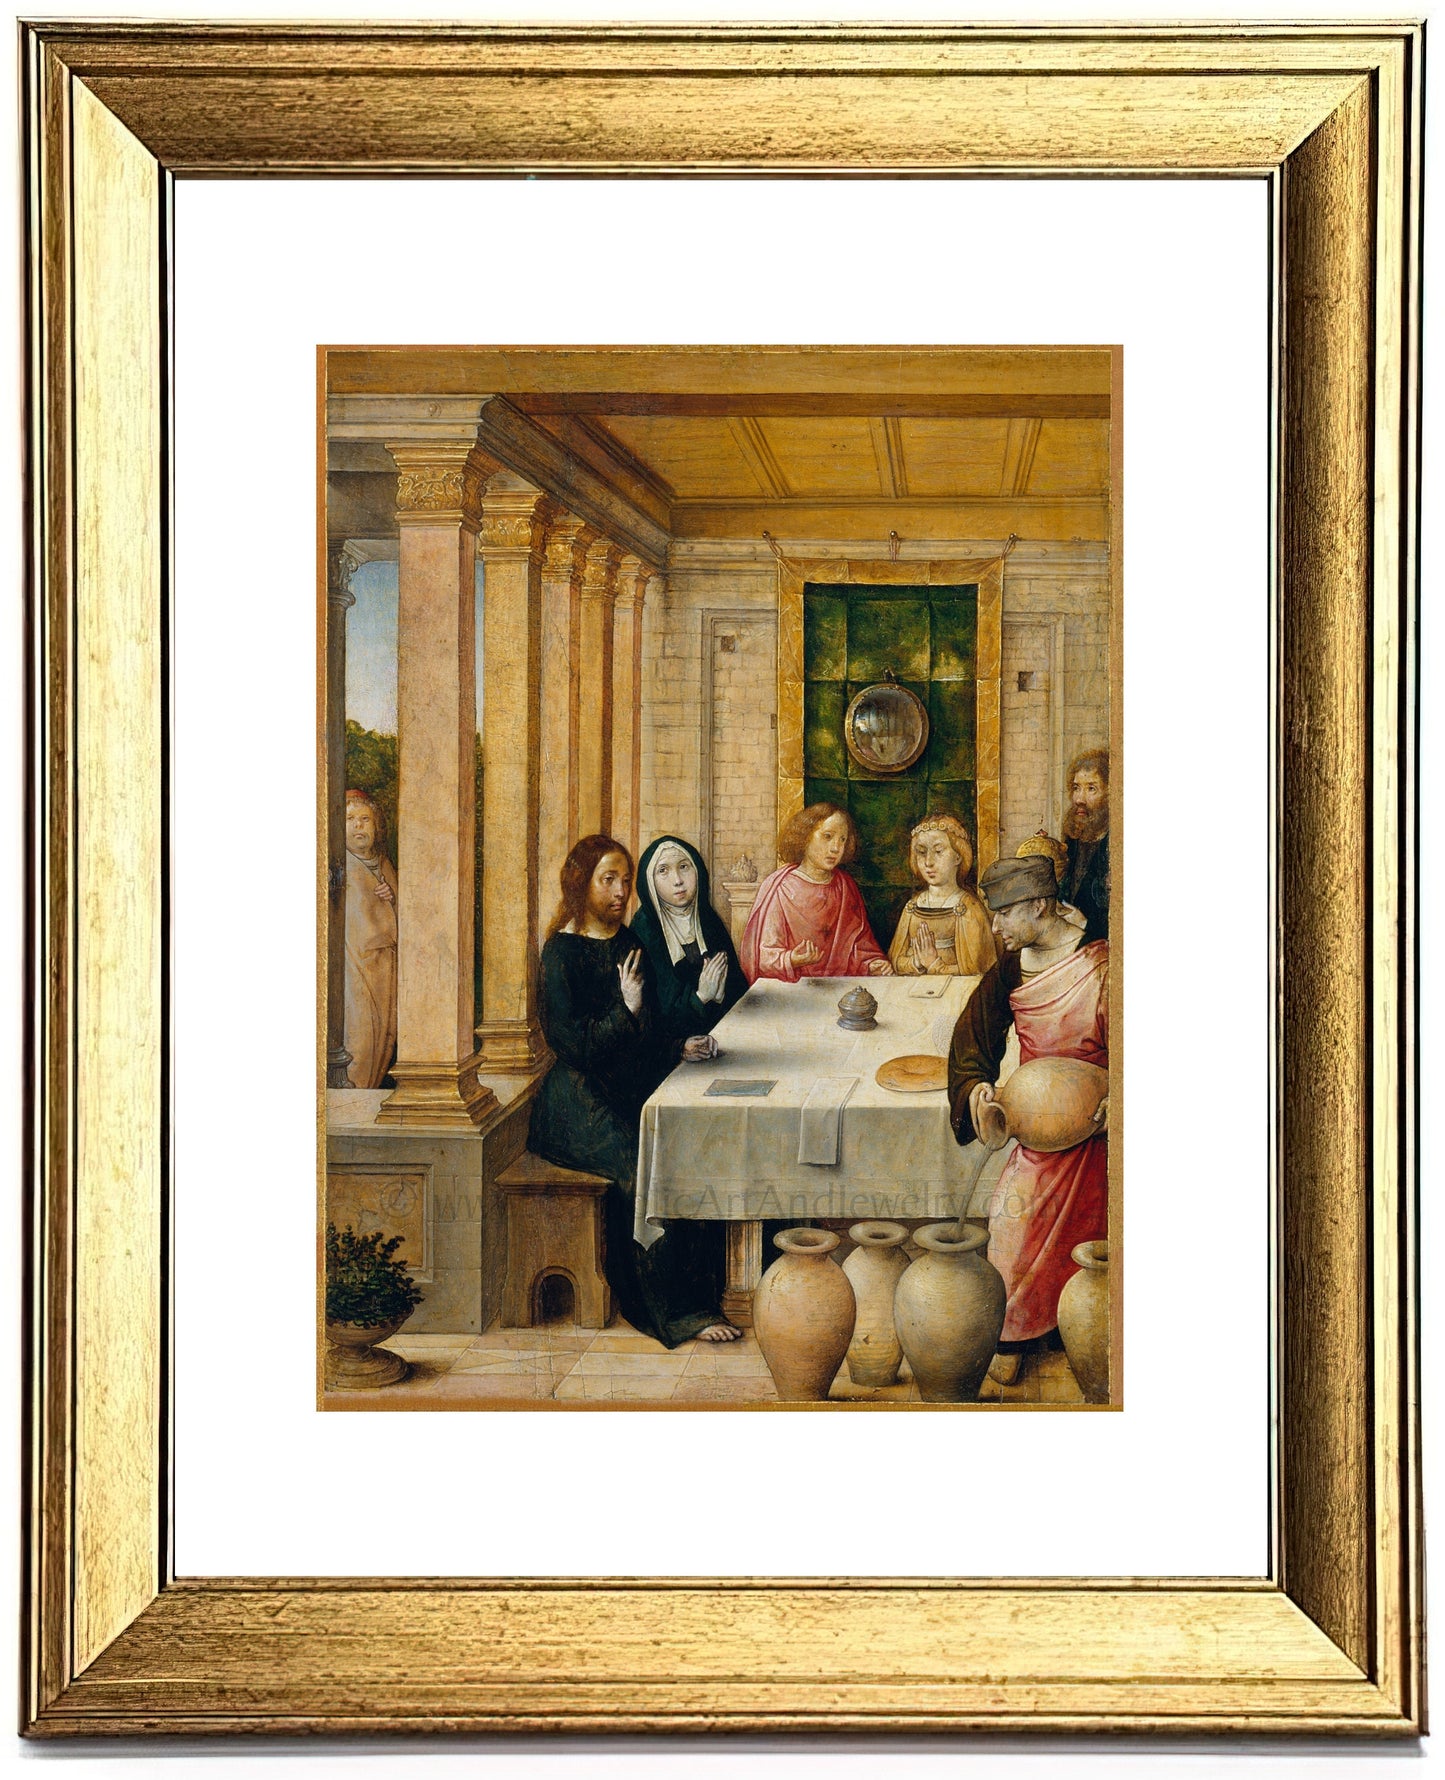 Wedding at Cana – 3 Sizes – Wedding Gift/Anniversary Gift –by Juan de Flandes – Catholic Art Print – Archival Quality